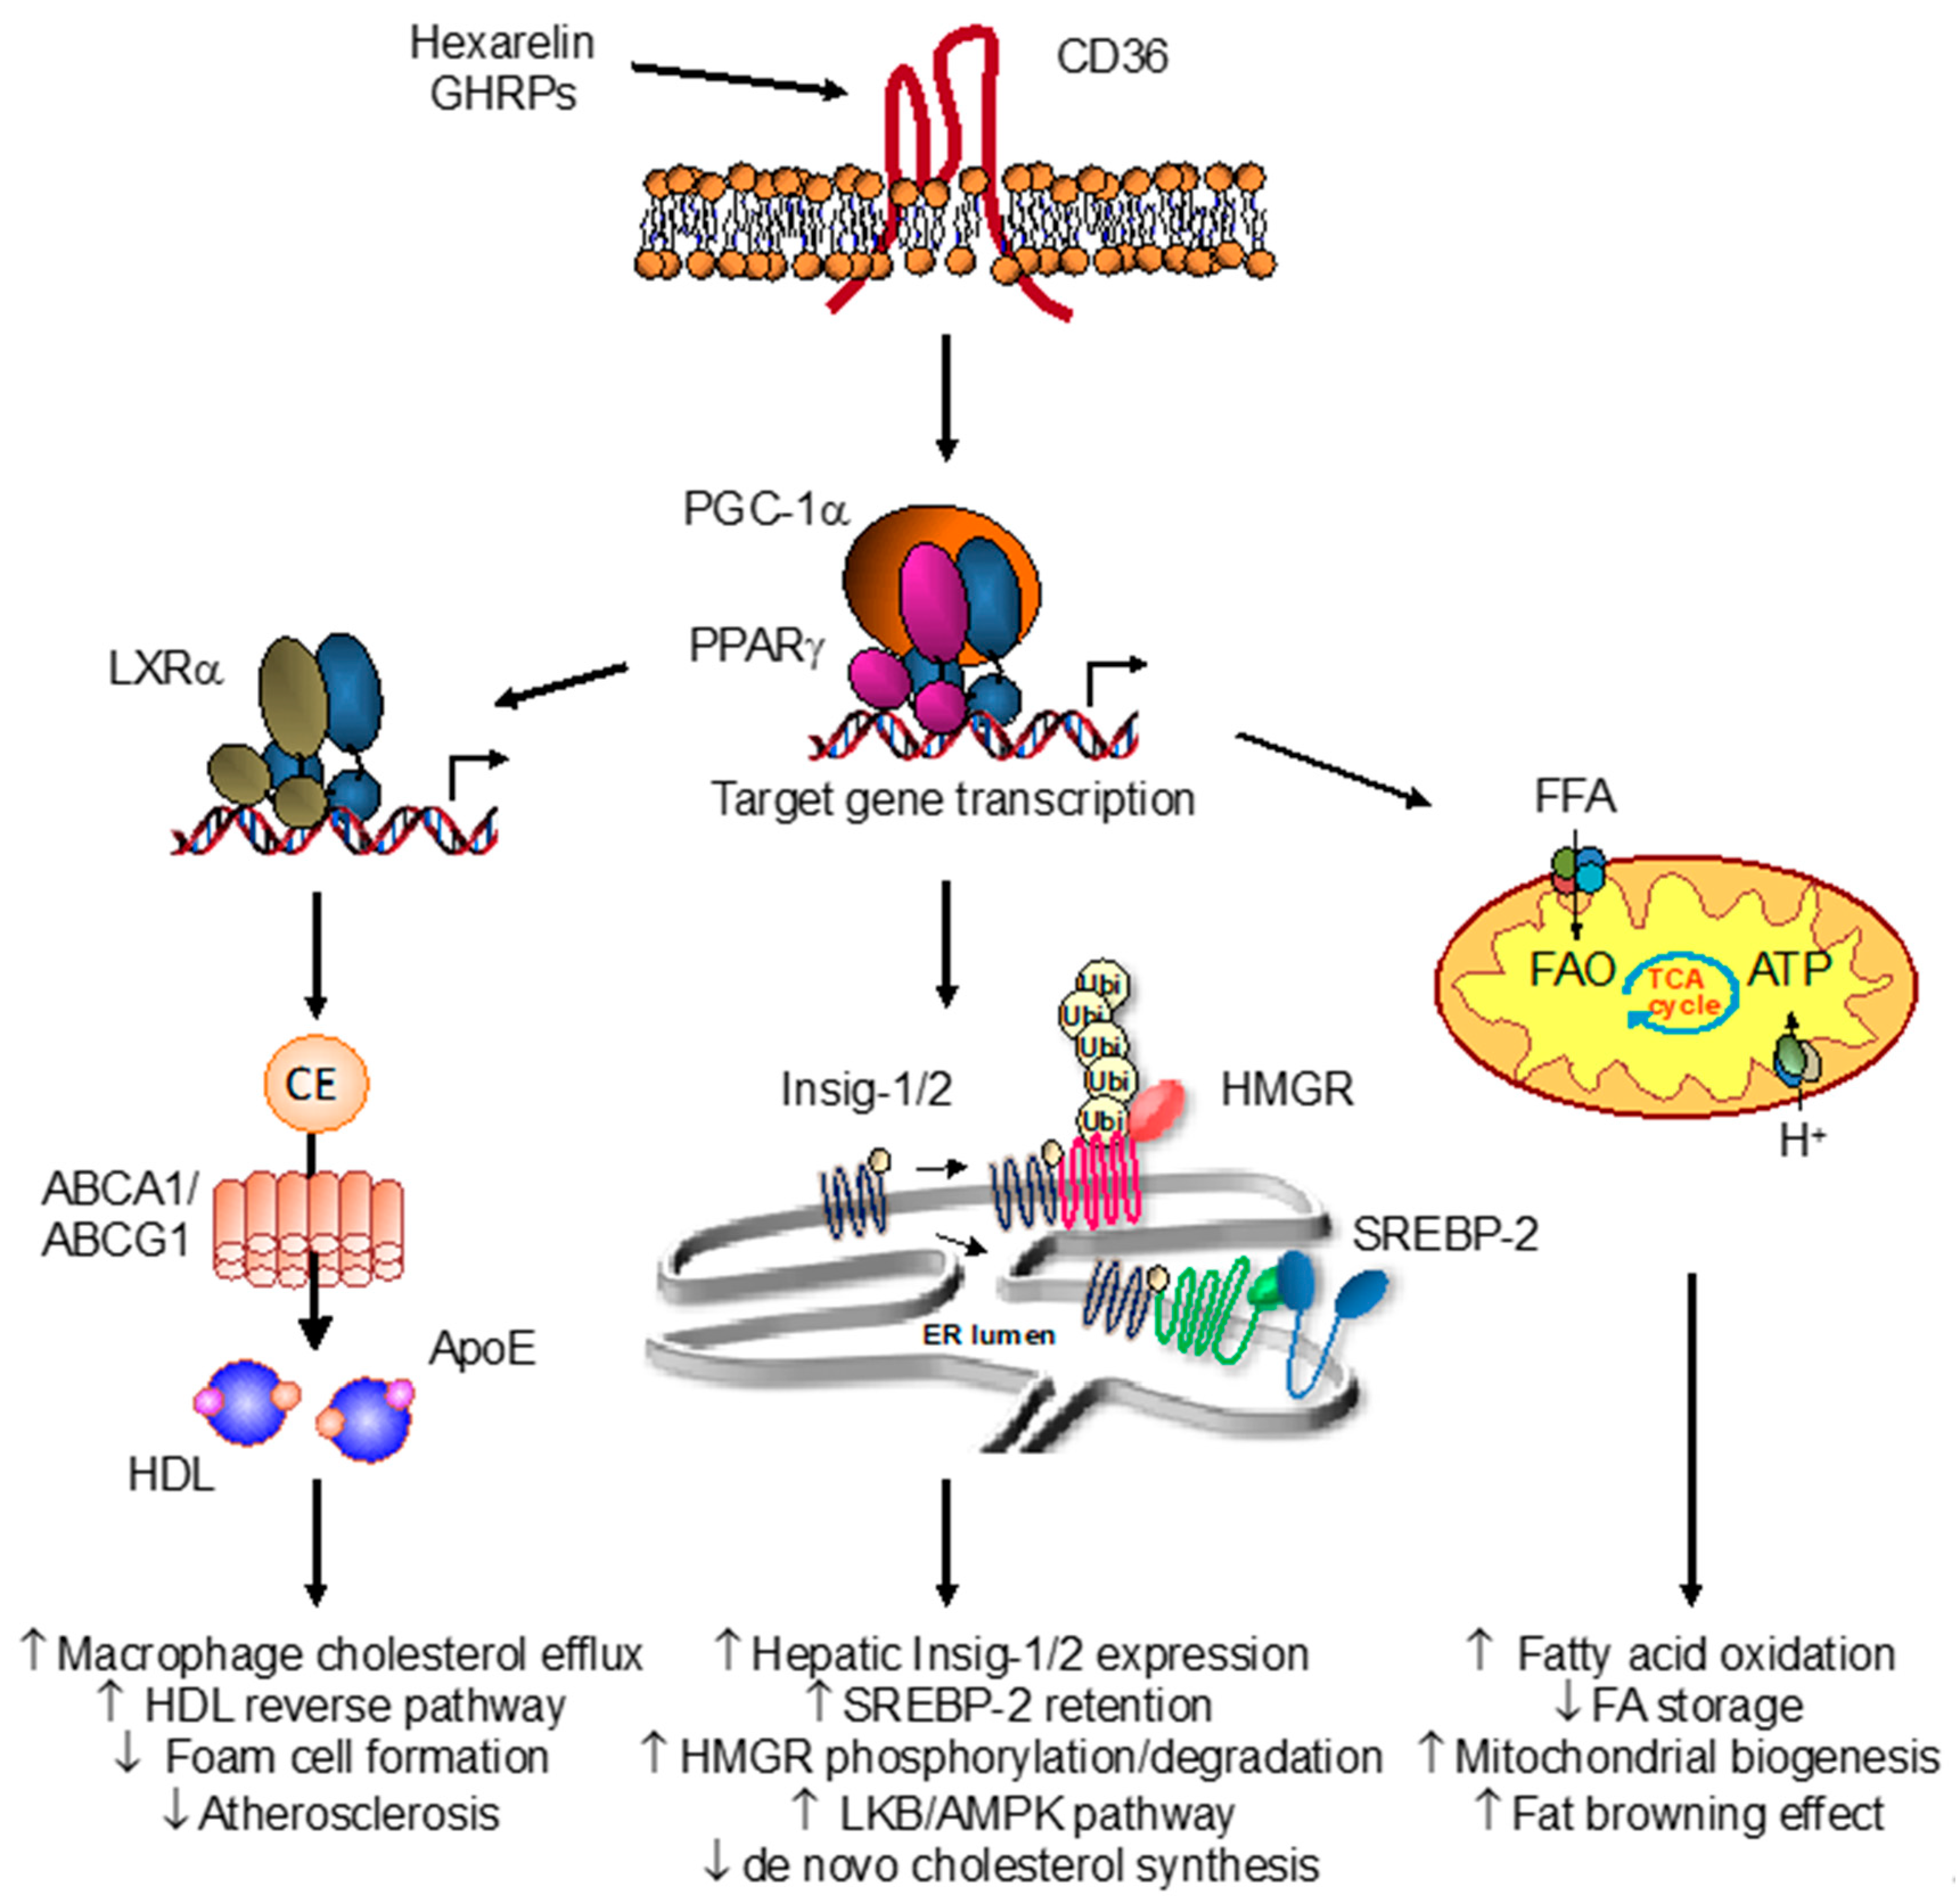 IJMS | Free Full-Text | The CD36-PPARγ Pathway in Metabolic Disorders